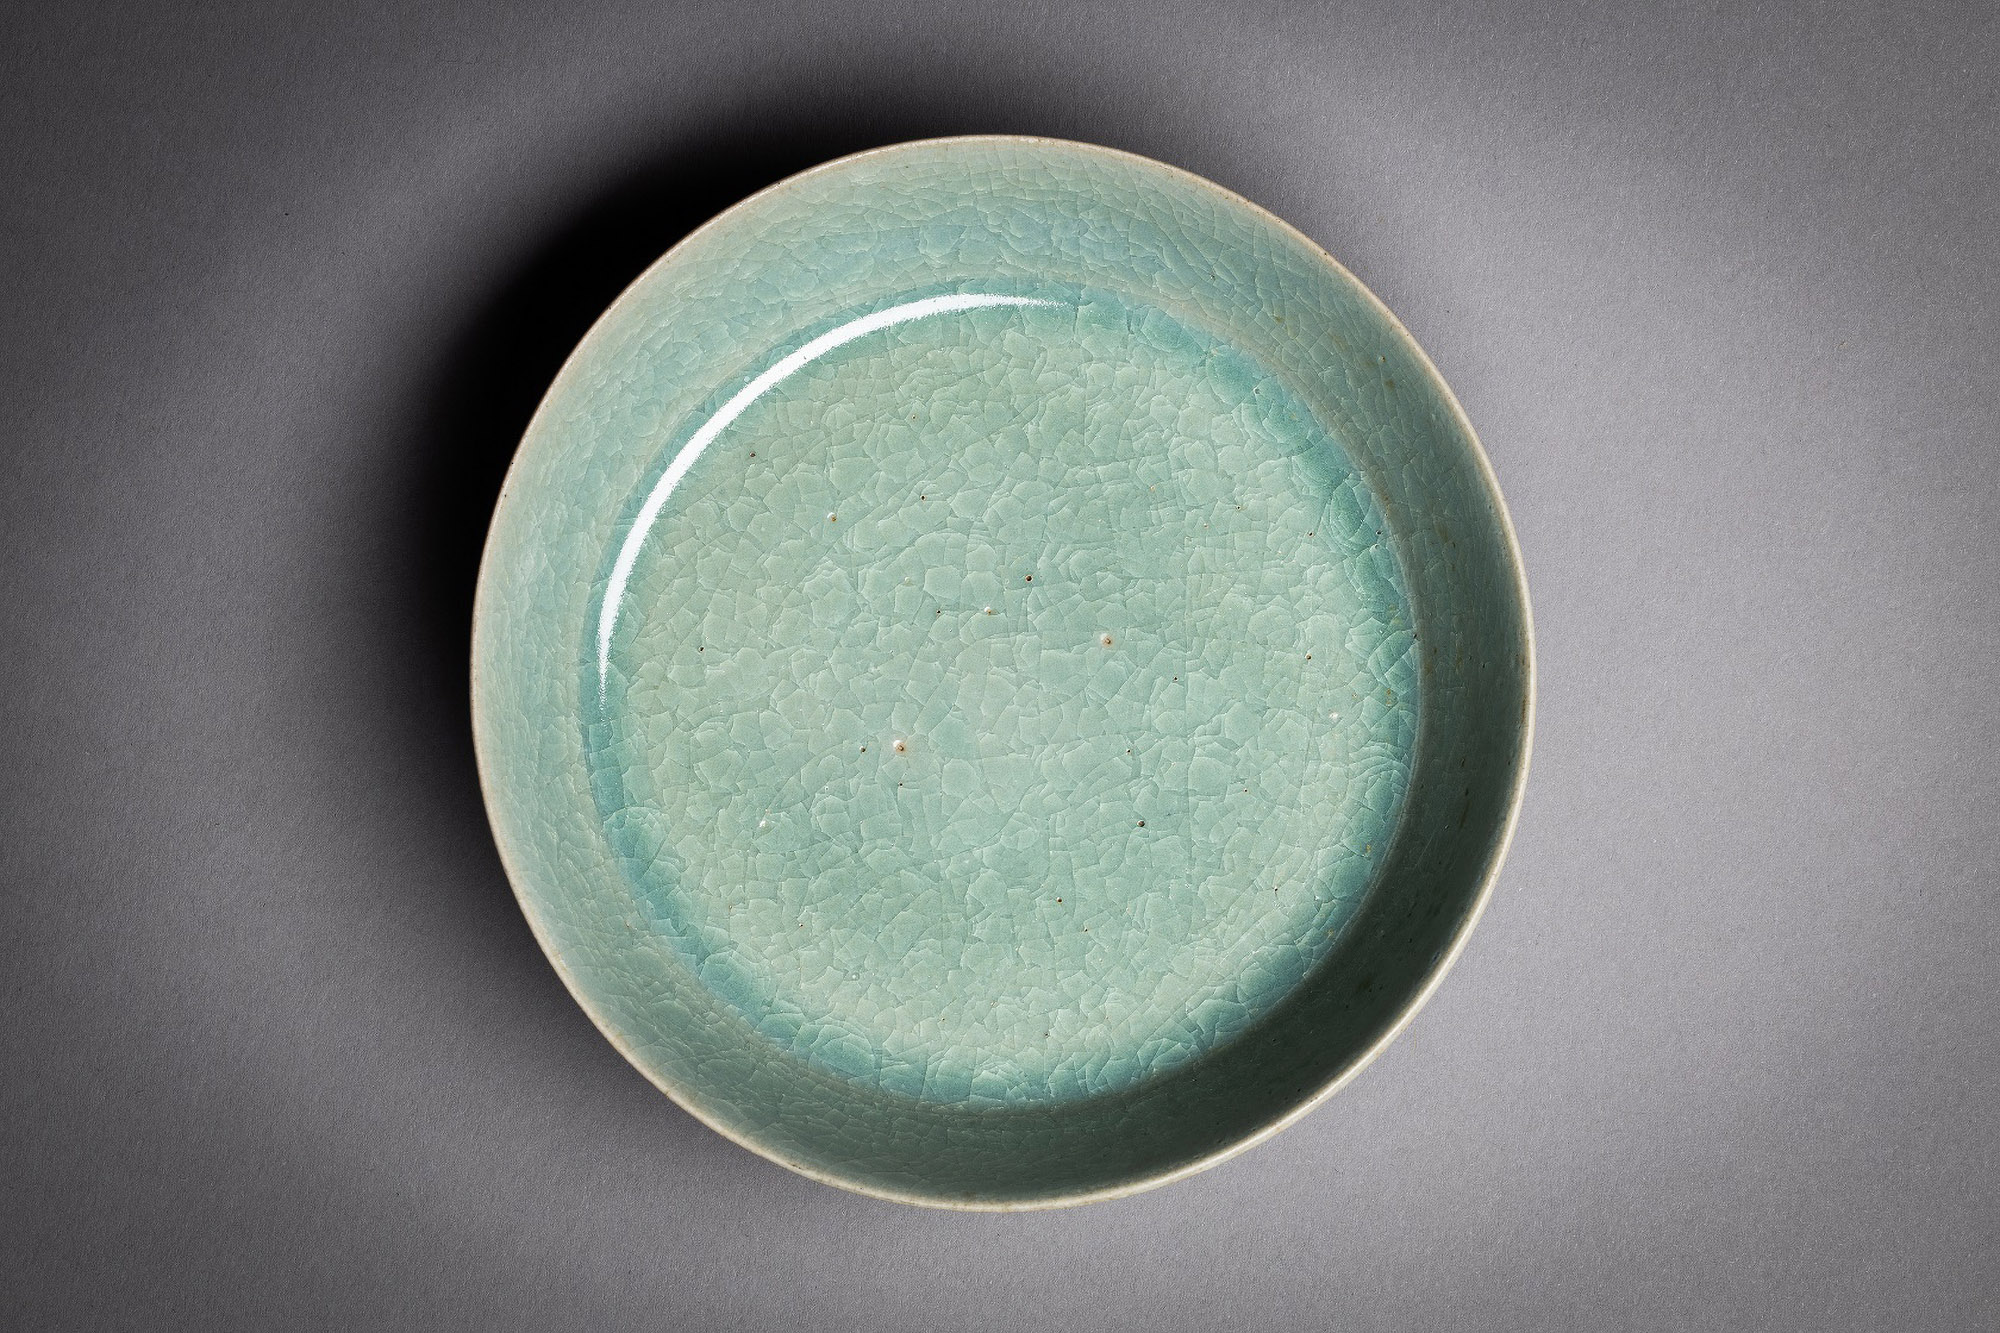 Read more about the article Ordinary Bowl Found To Be Song Dynasty Artefact Worth Around GBP 30M